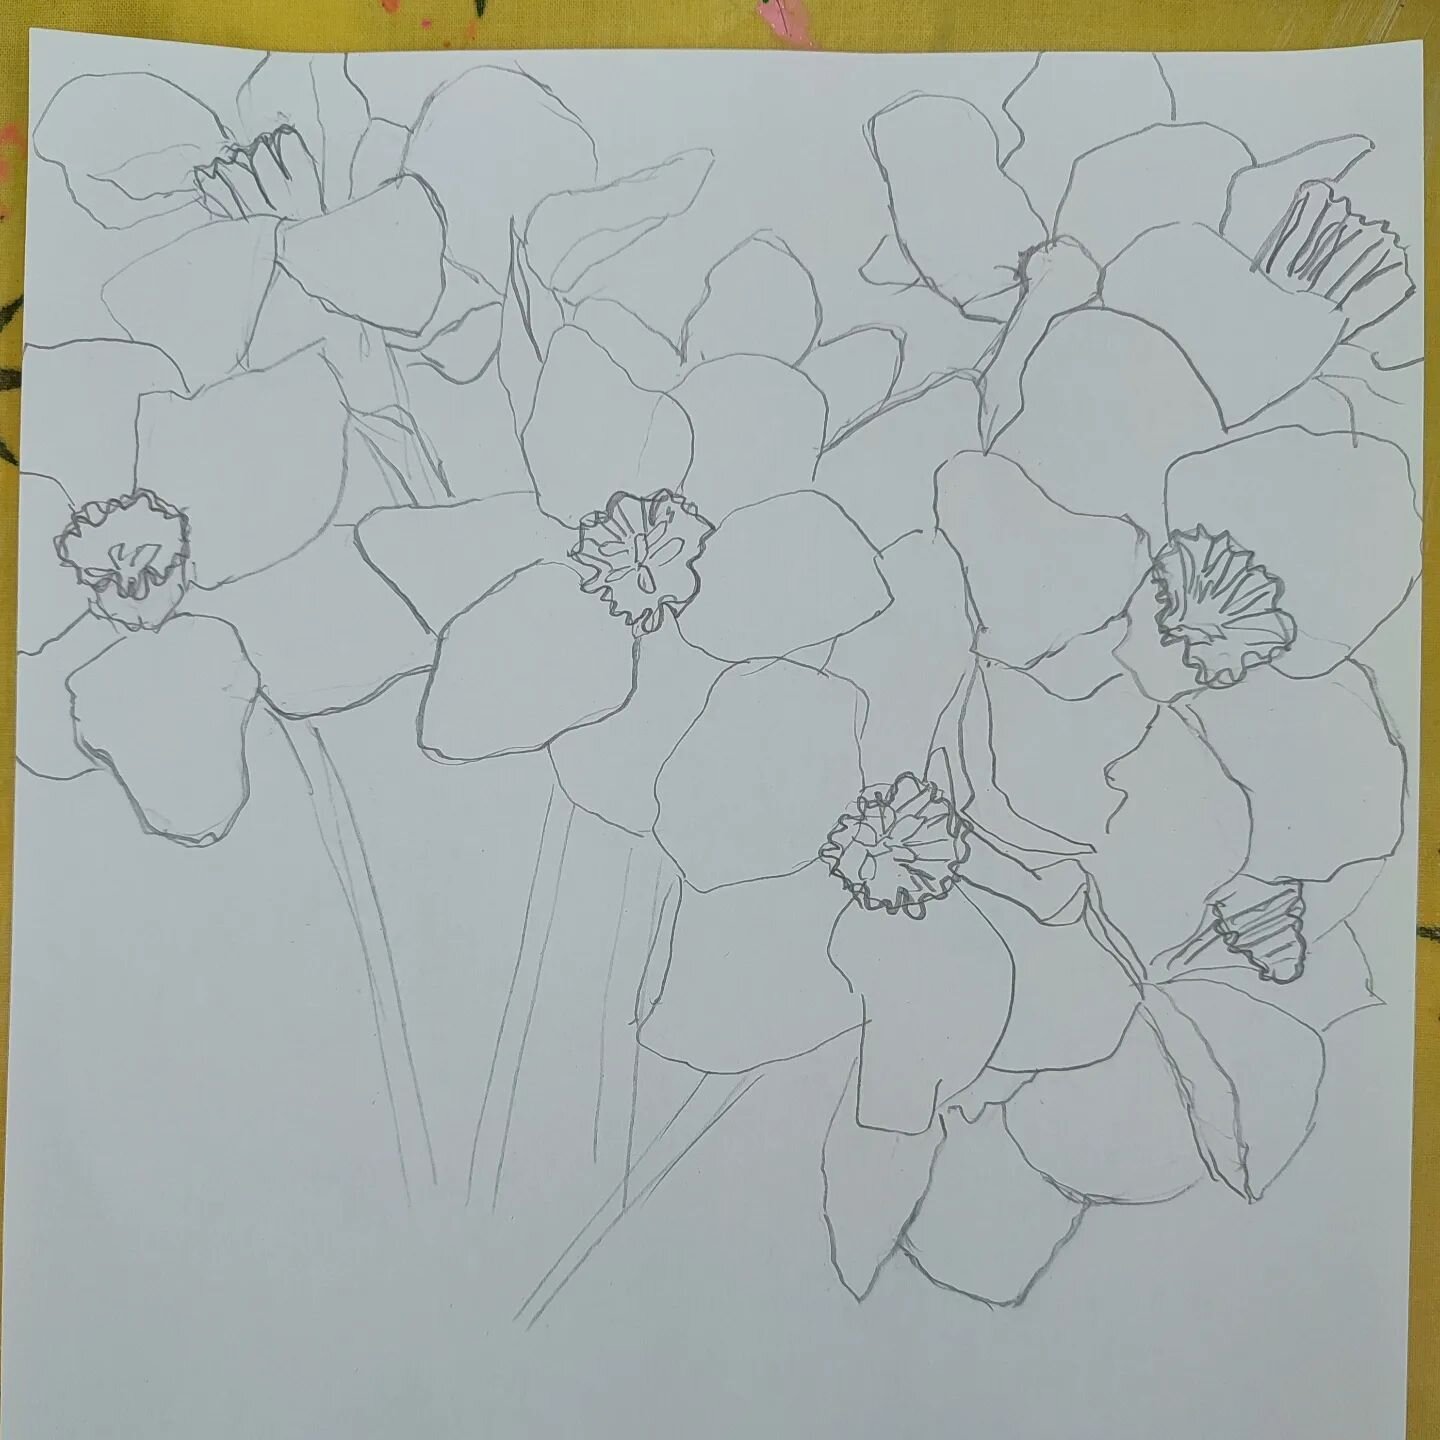 A daffodil sketch in pencil....

I'll be exhibiting at the Caversham Arts Trail starting next weekend!
 
Sat 13th and Sun 14th May 
Sat 20th and Sun 21st May 

Really looking forward to it. I'll be at venue 3 with 3 other artists @silhouettist @linda